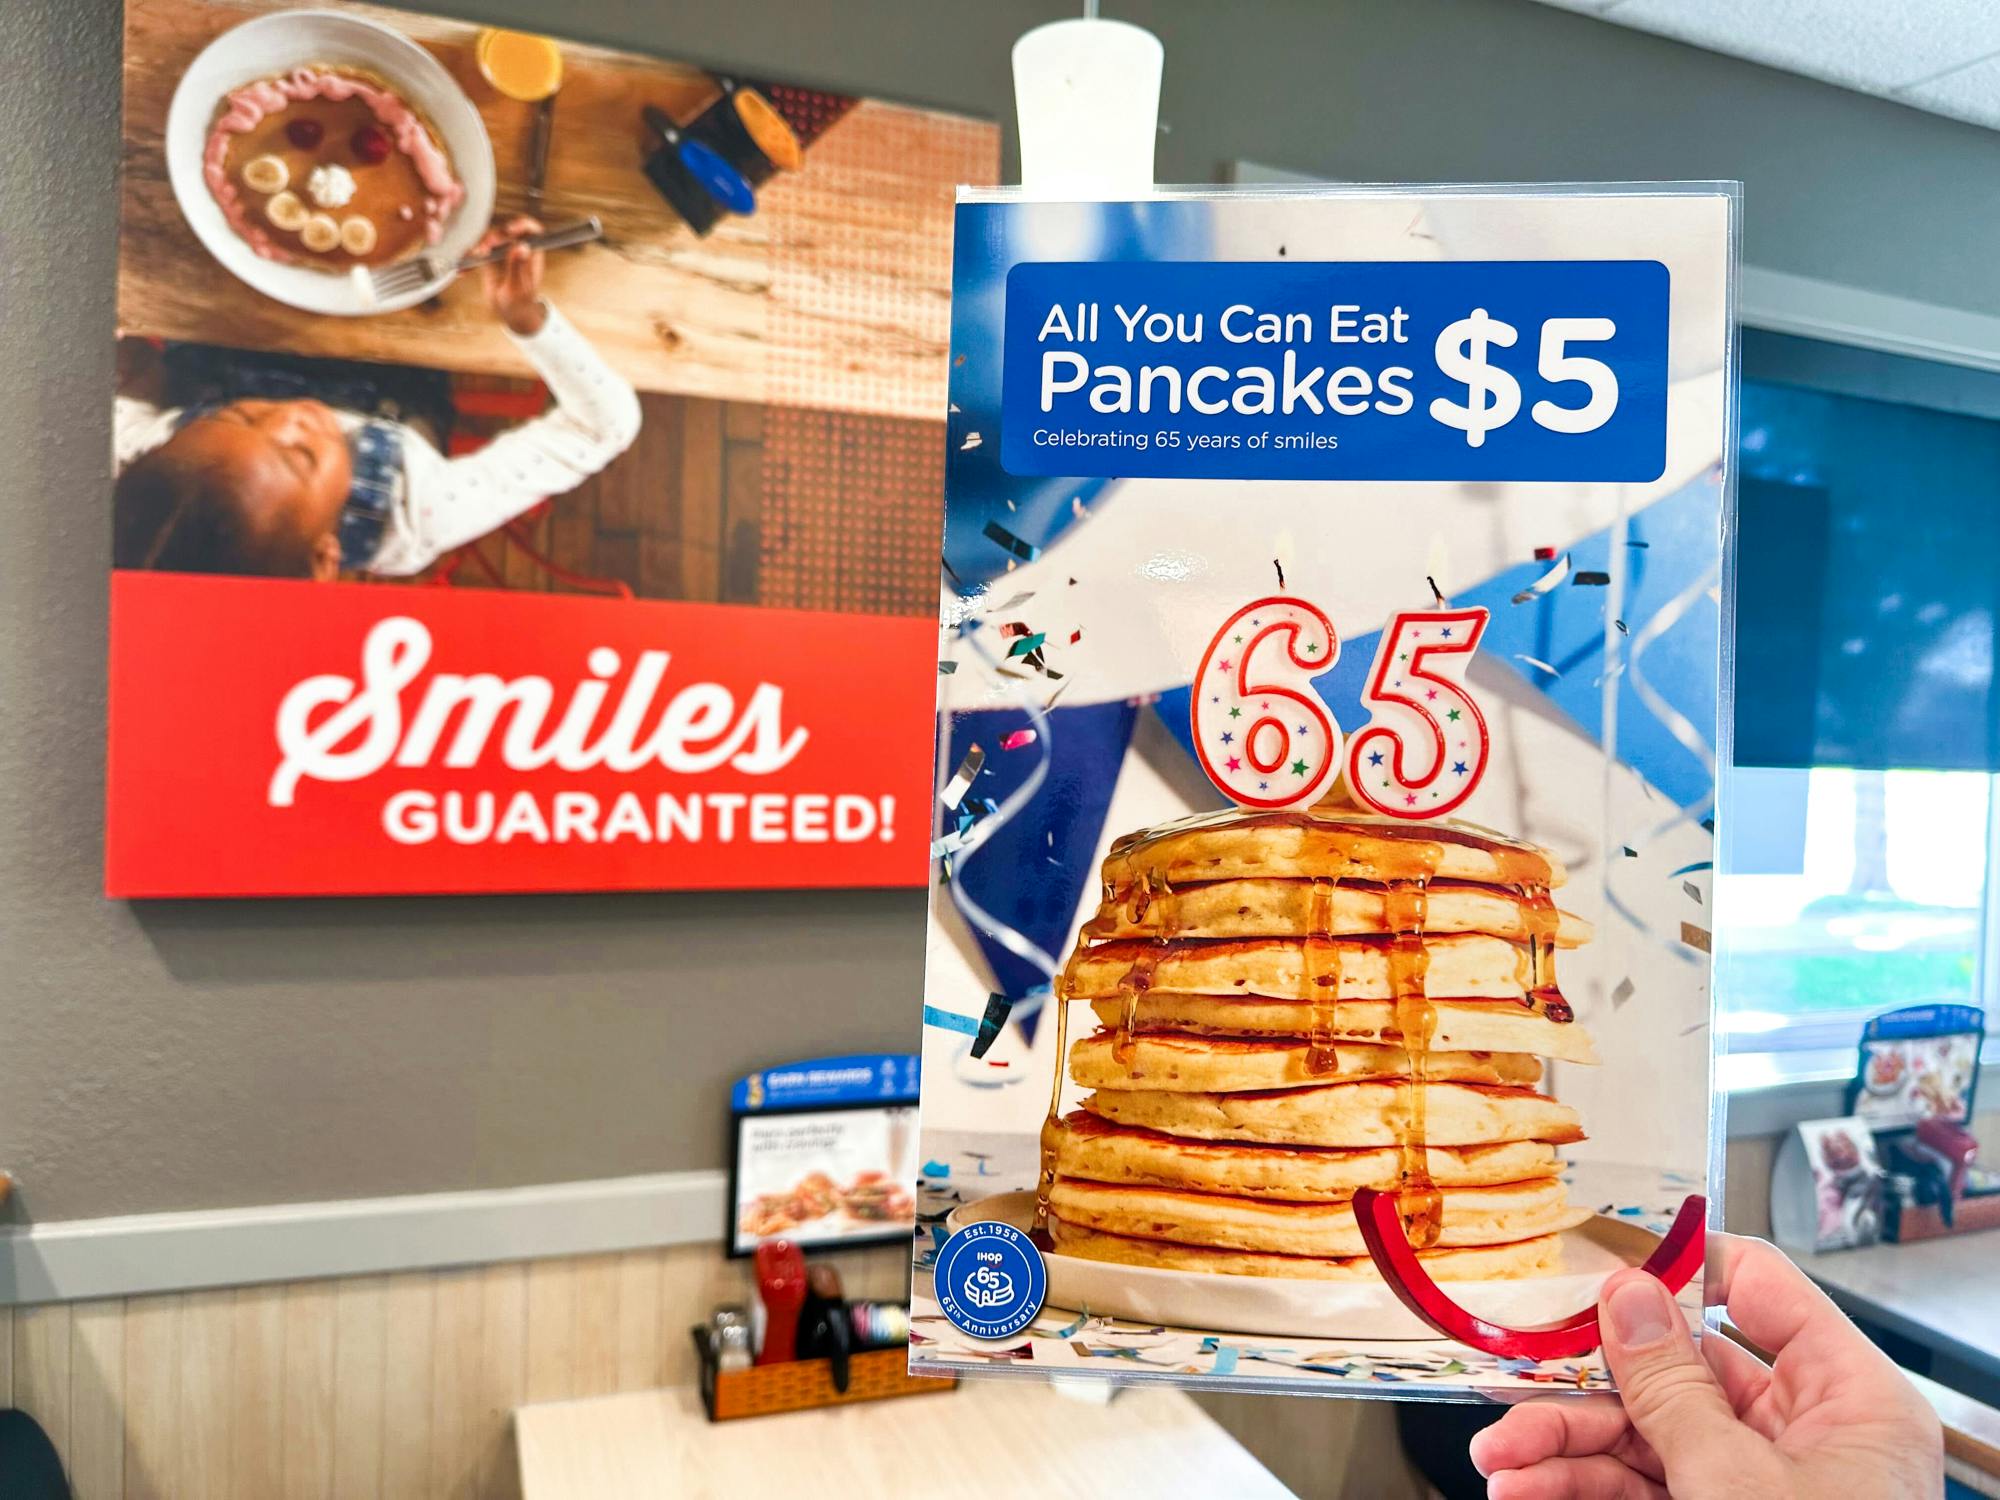 All-You-Can-Eat Pancakes Return to IHOP for $3.99 - FSR magazine